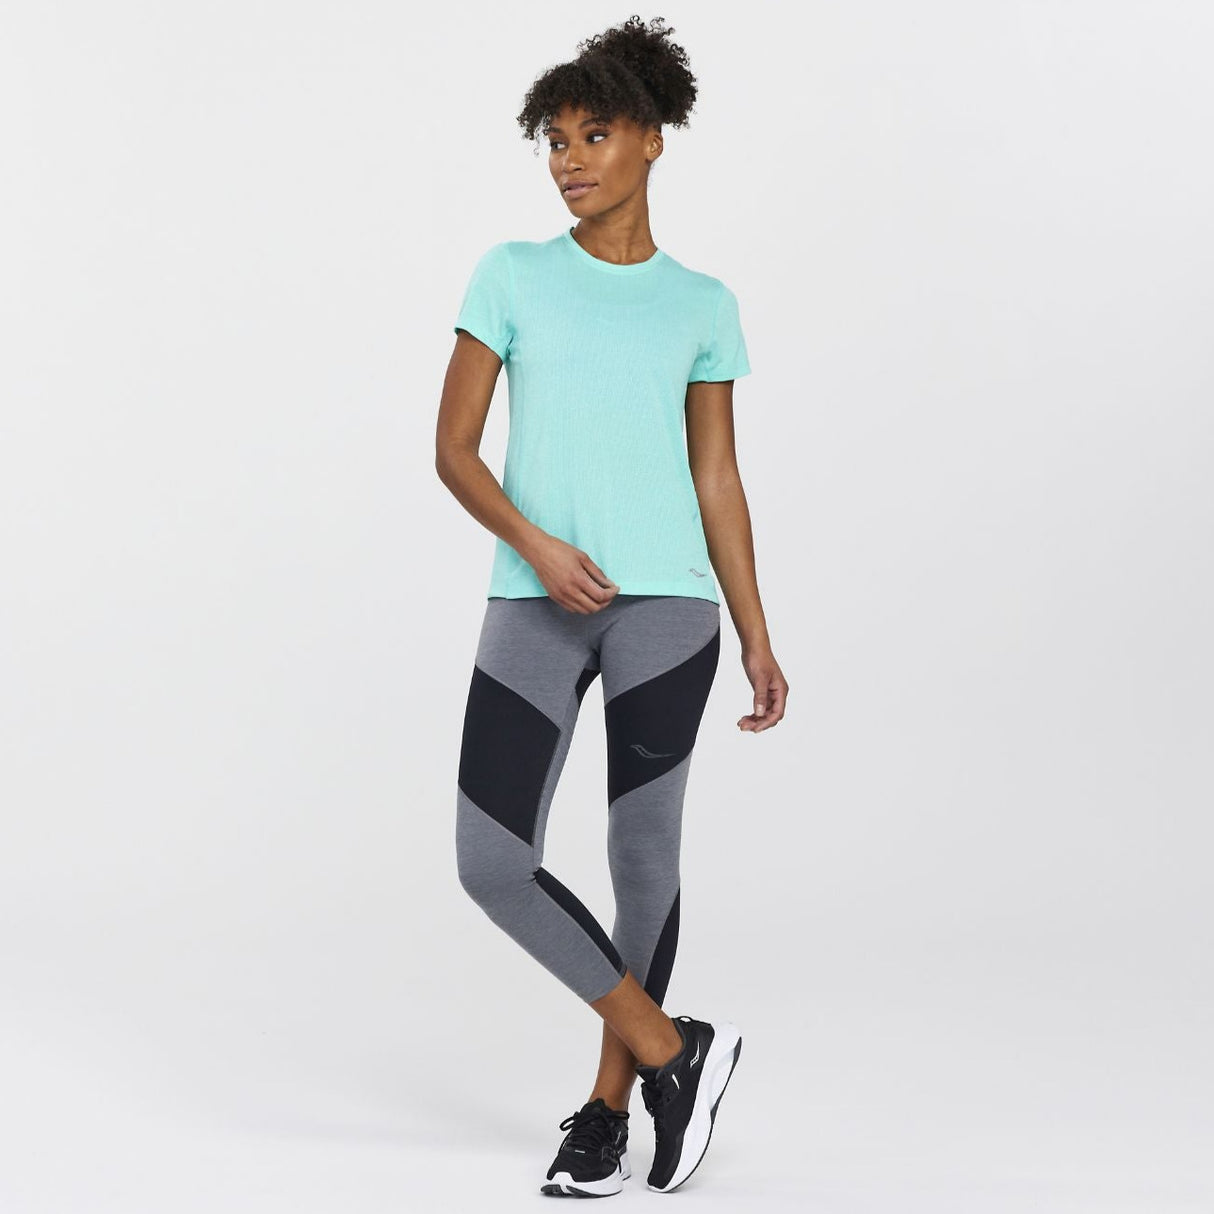 Saucony Women's Time Trial Crop Tight